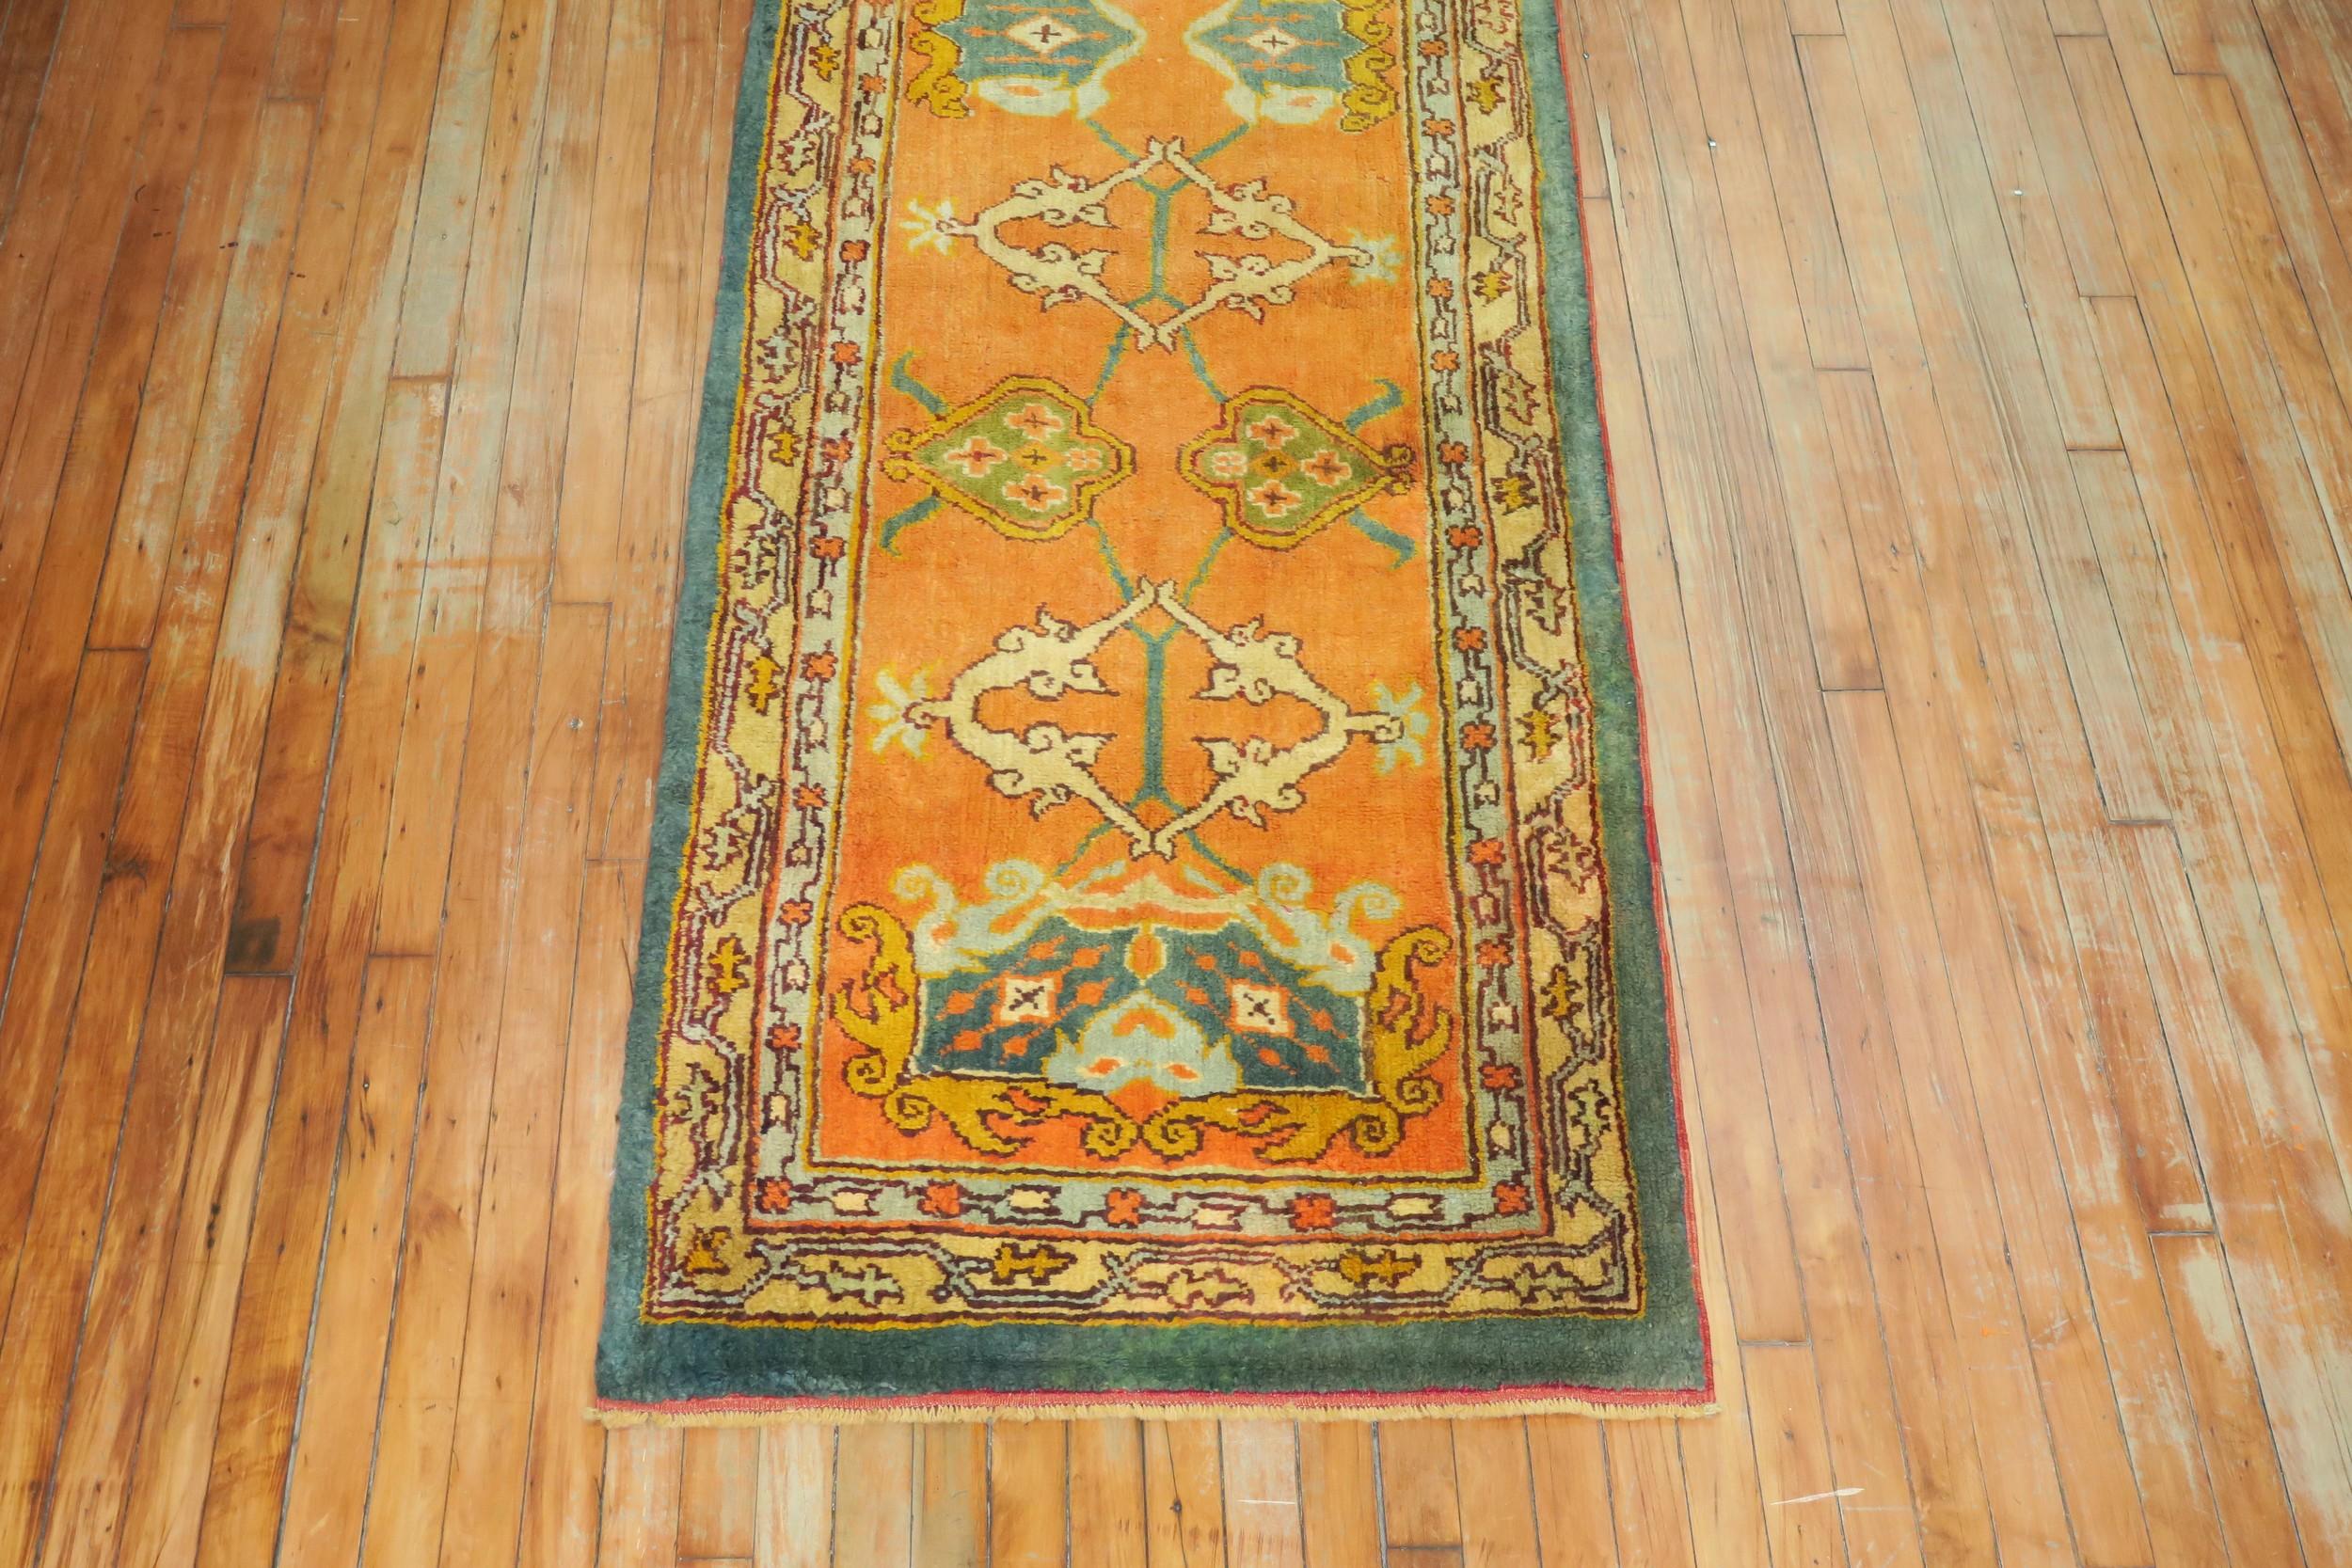 An early 20th century antique Oushak runner featuring a pumpkin orange field, forest green border with an all-over design attributed to the Arts & Crafts movement.

Measures: 2'10” x 15'8”.